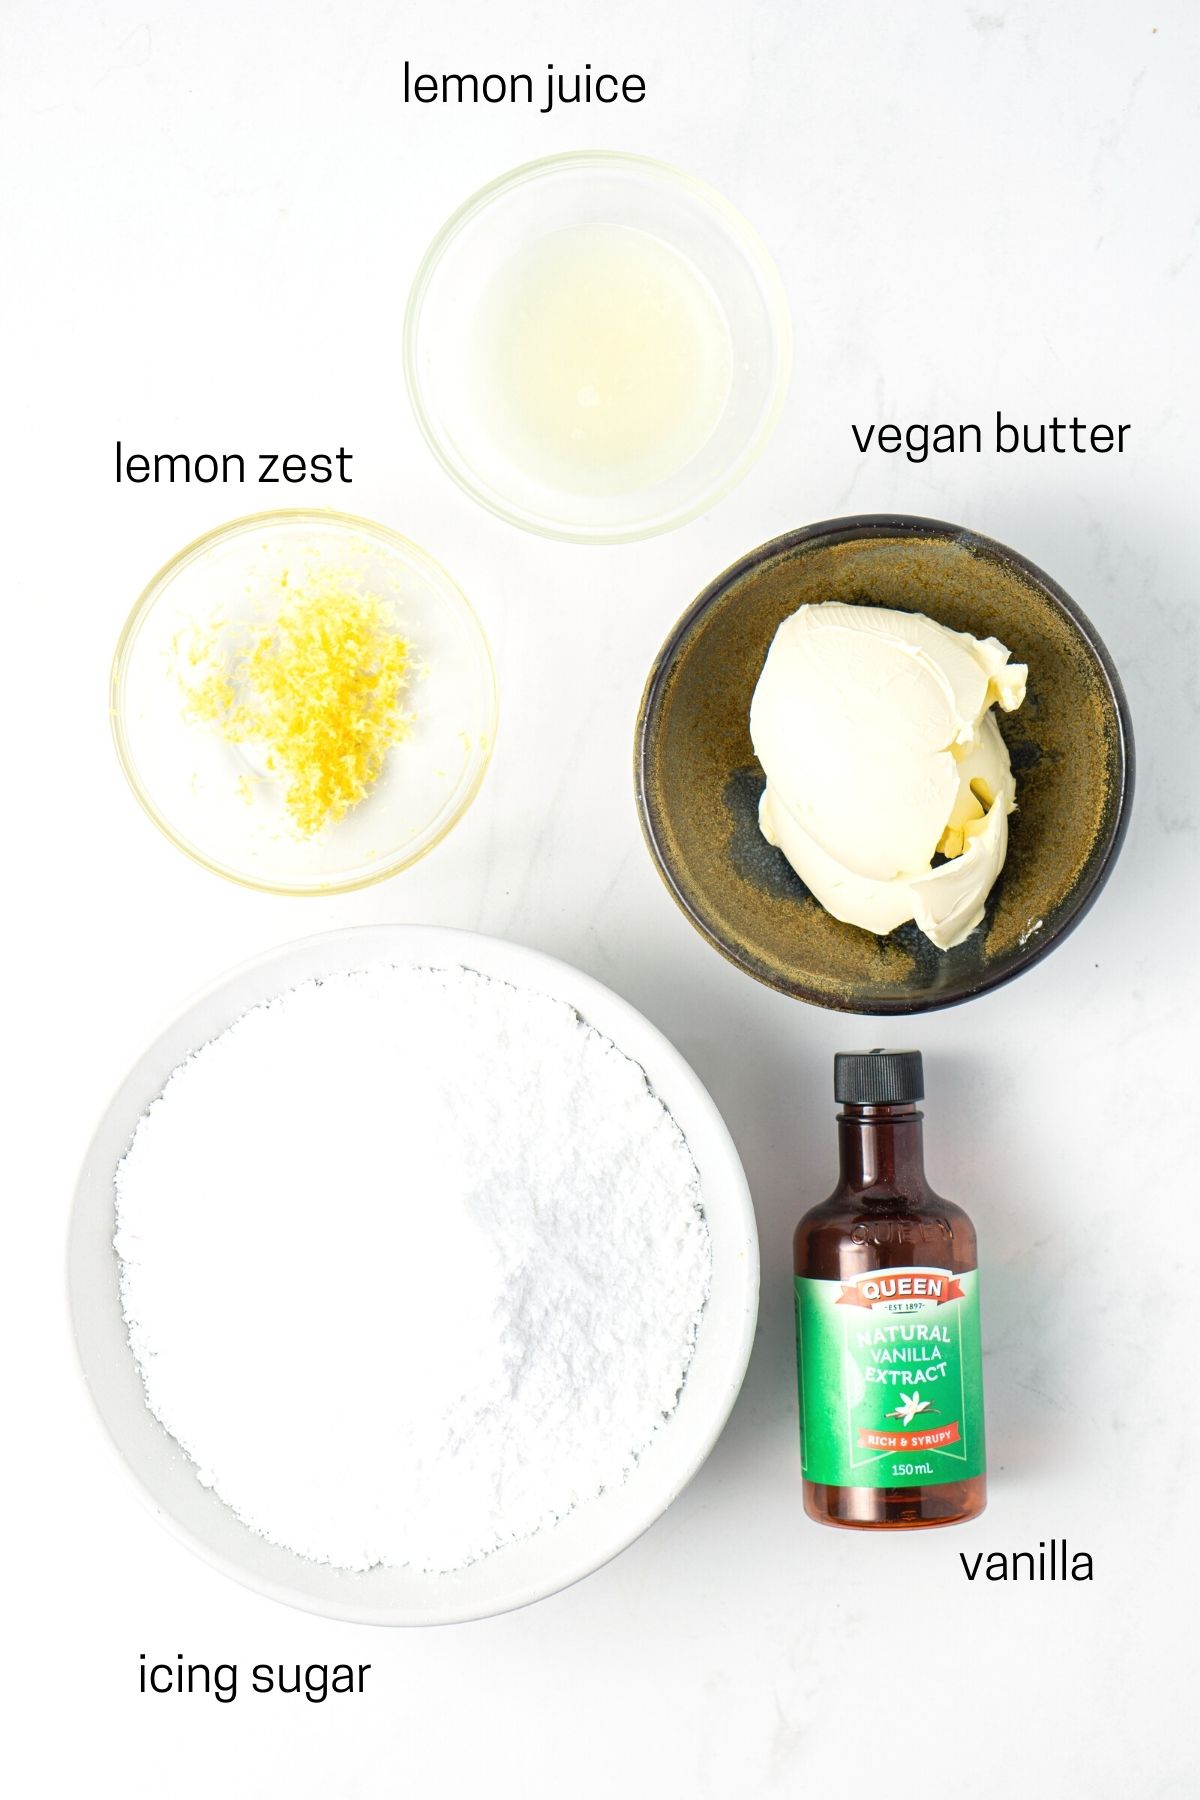 All ingredients needed for vegan lemon buttercream laid out in small bowls.